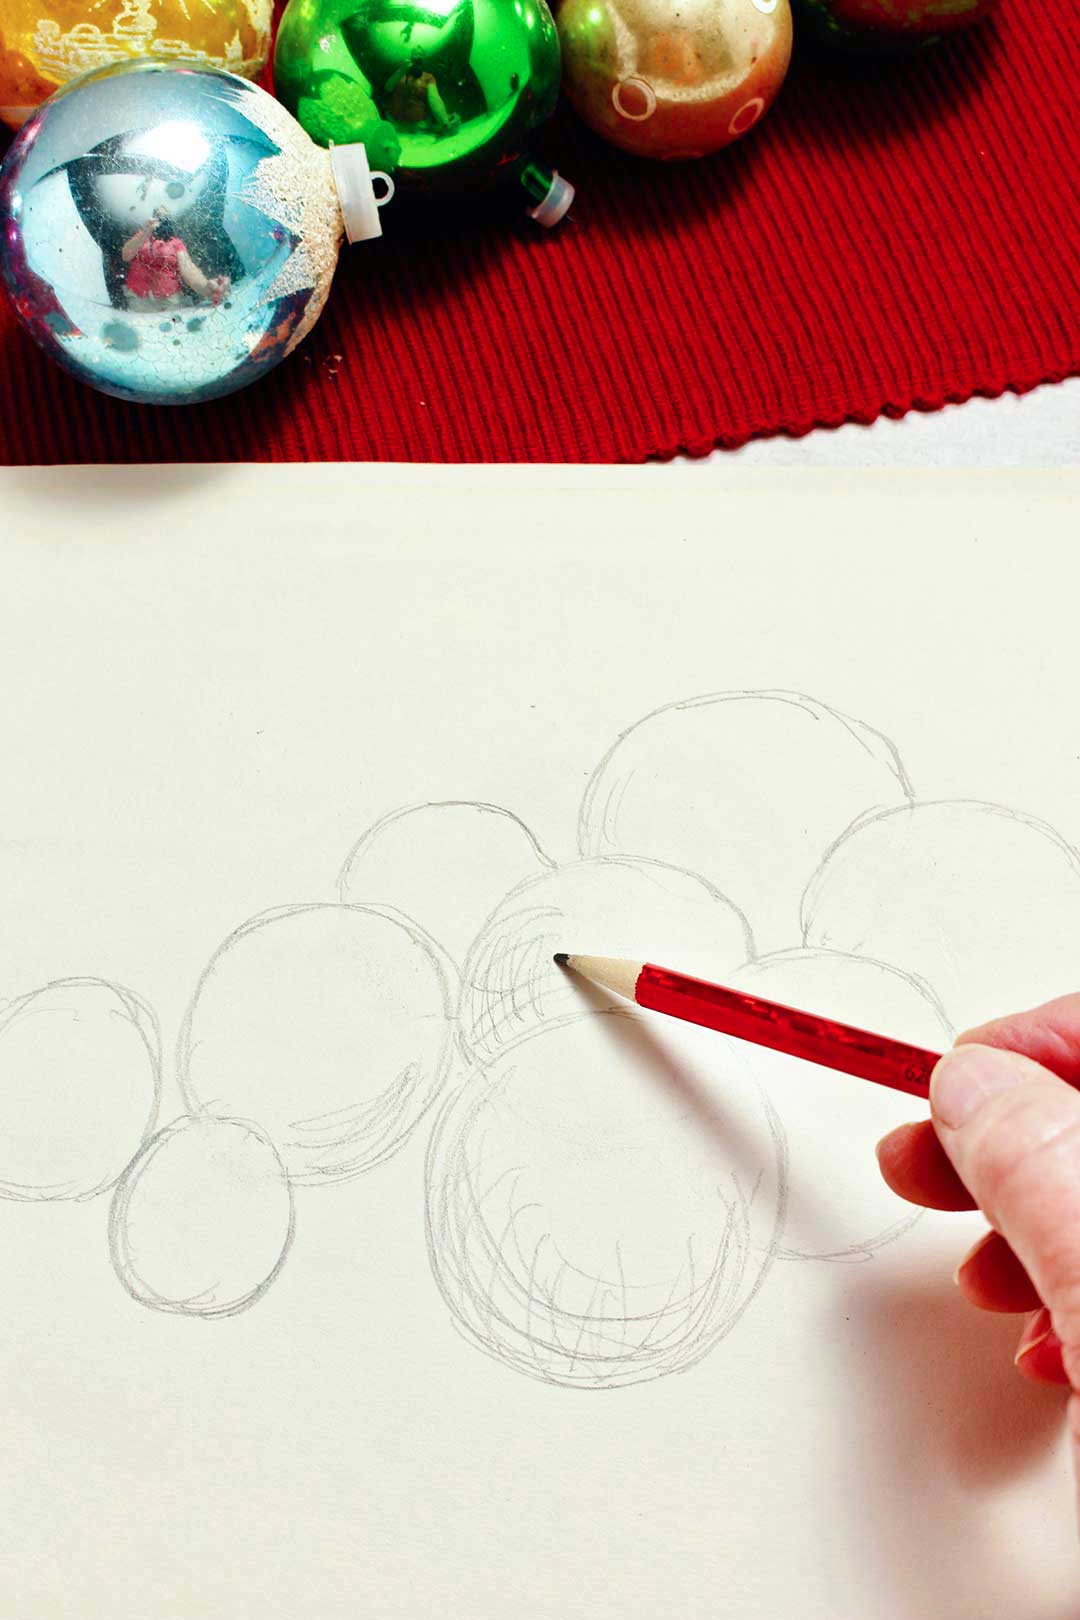 Close up view of person doing rough shedding on sketch of Christmas ornaments.